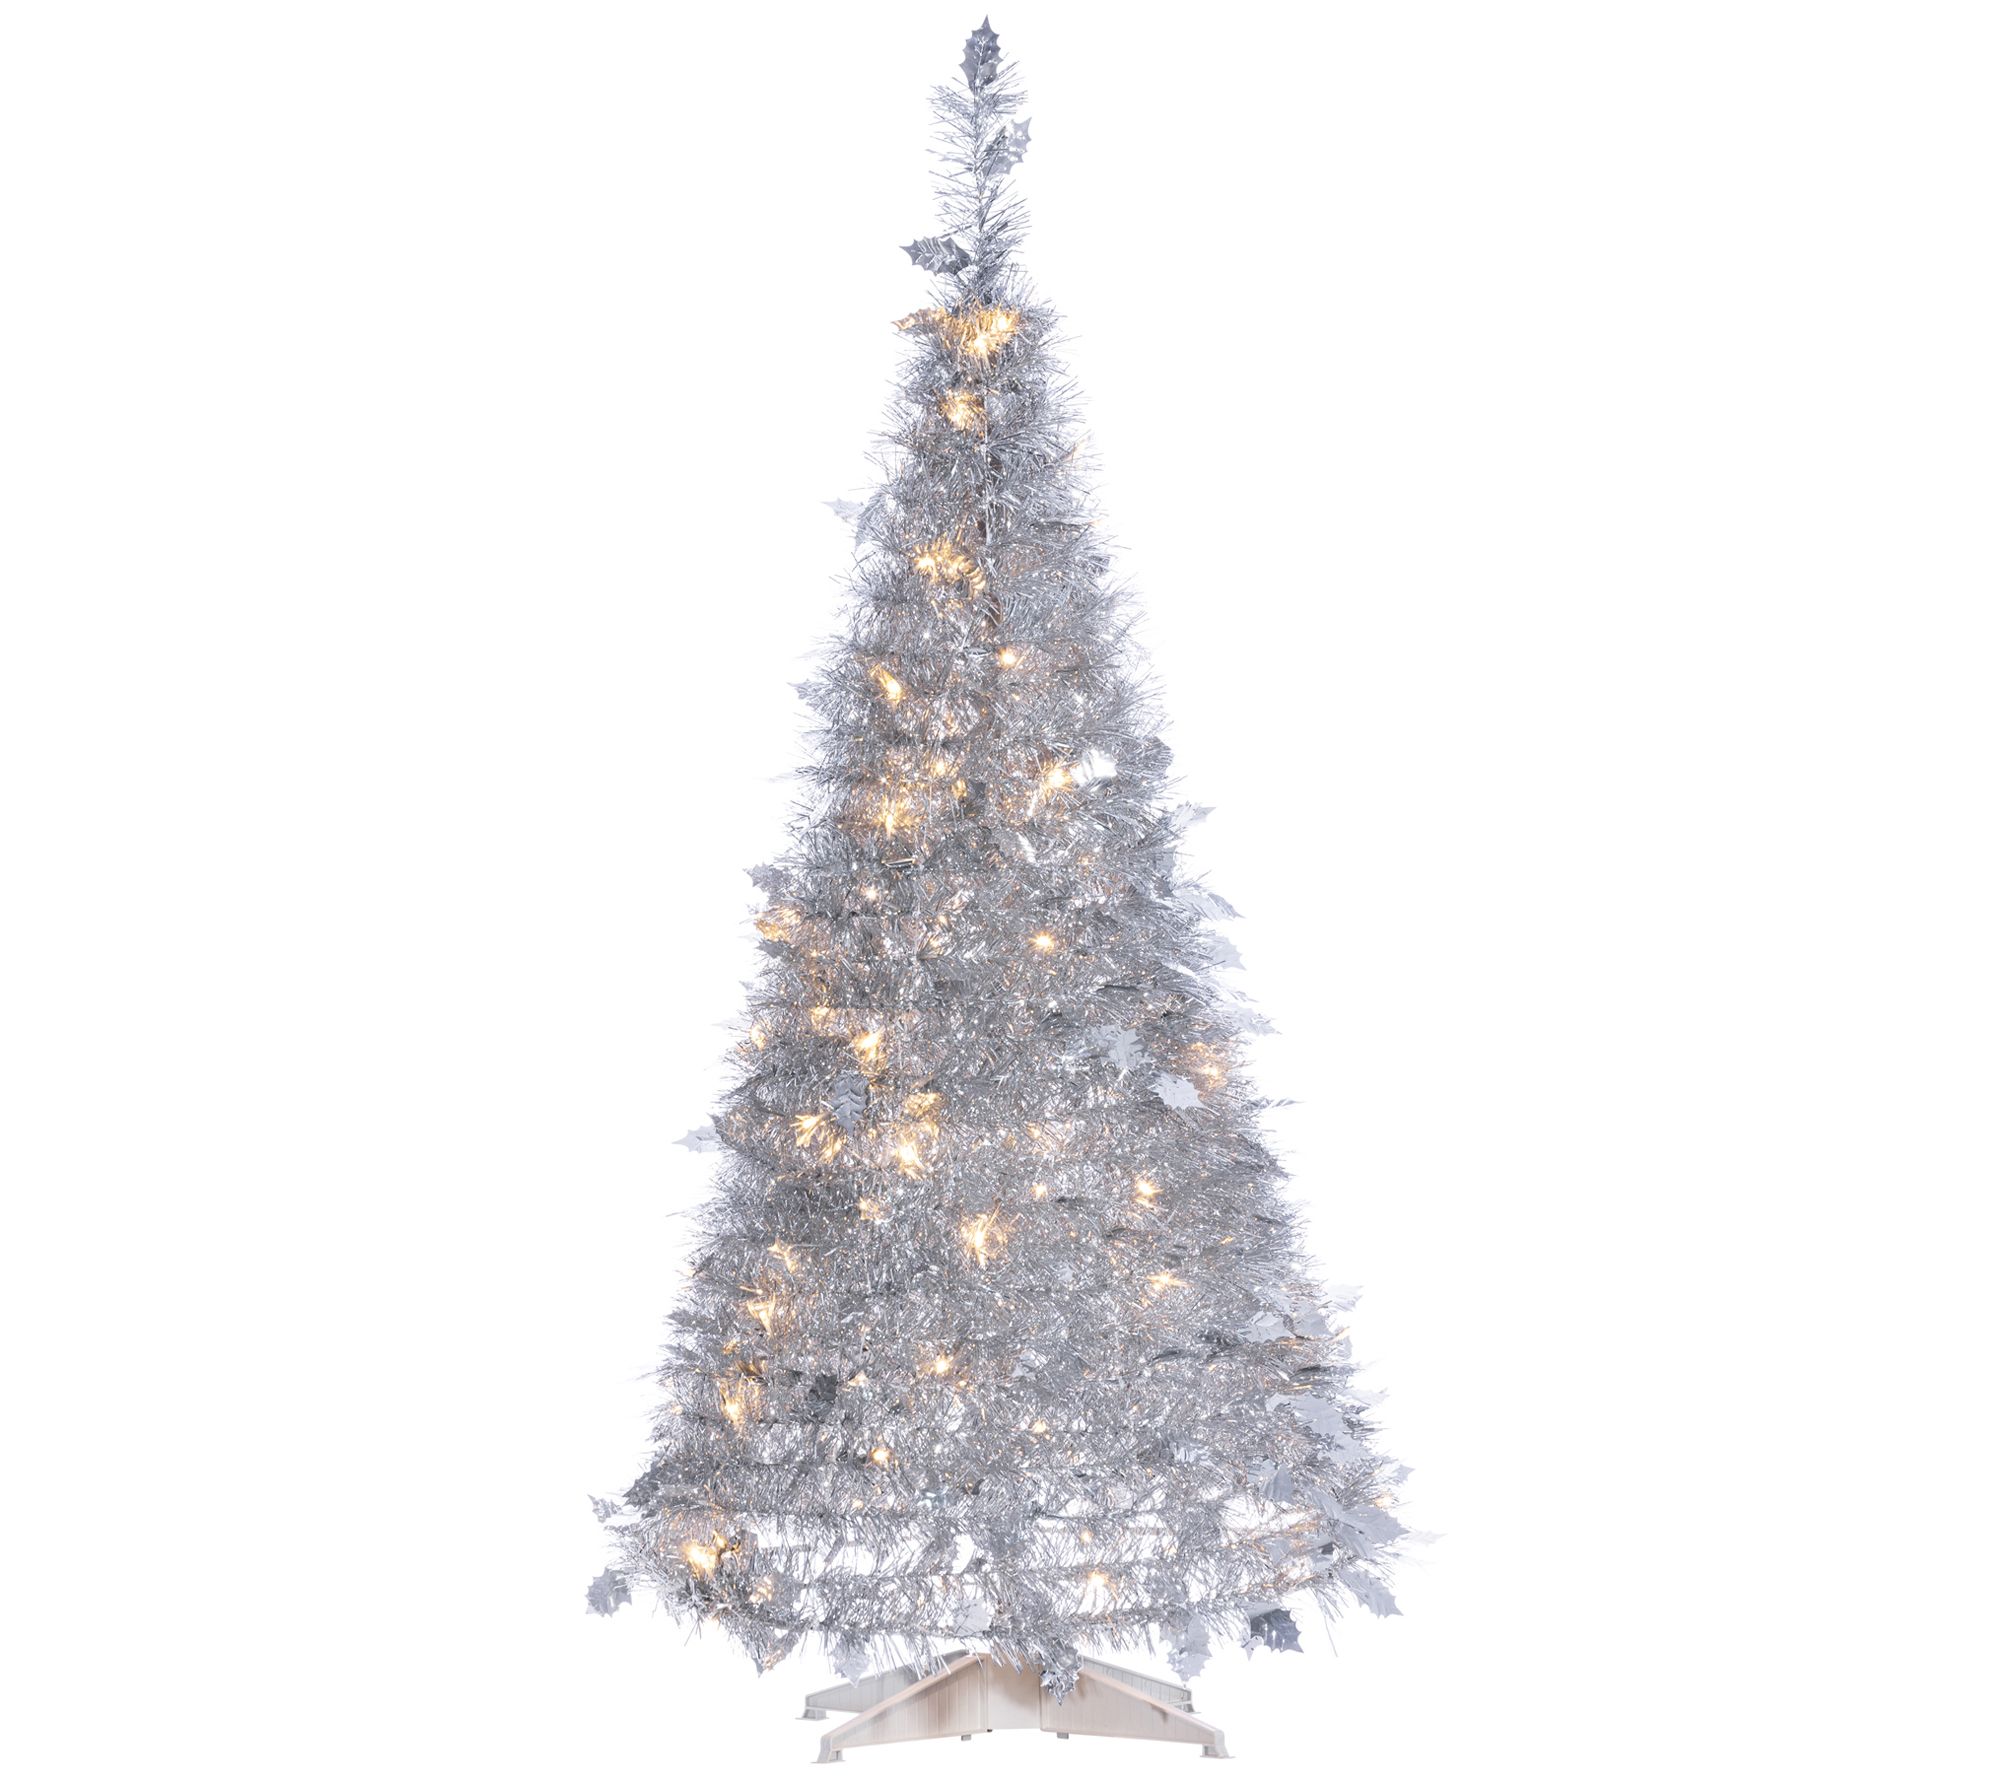 4-Foot High Pop Up Pre-Lit Silver Tinsel Tree by Gerson Co. - QVC.com